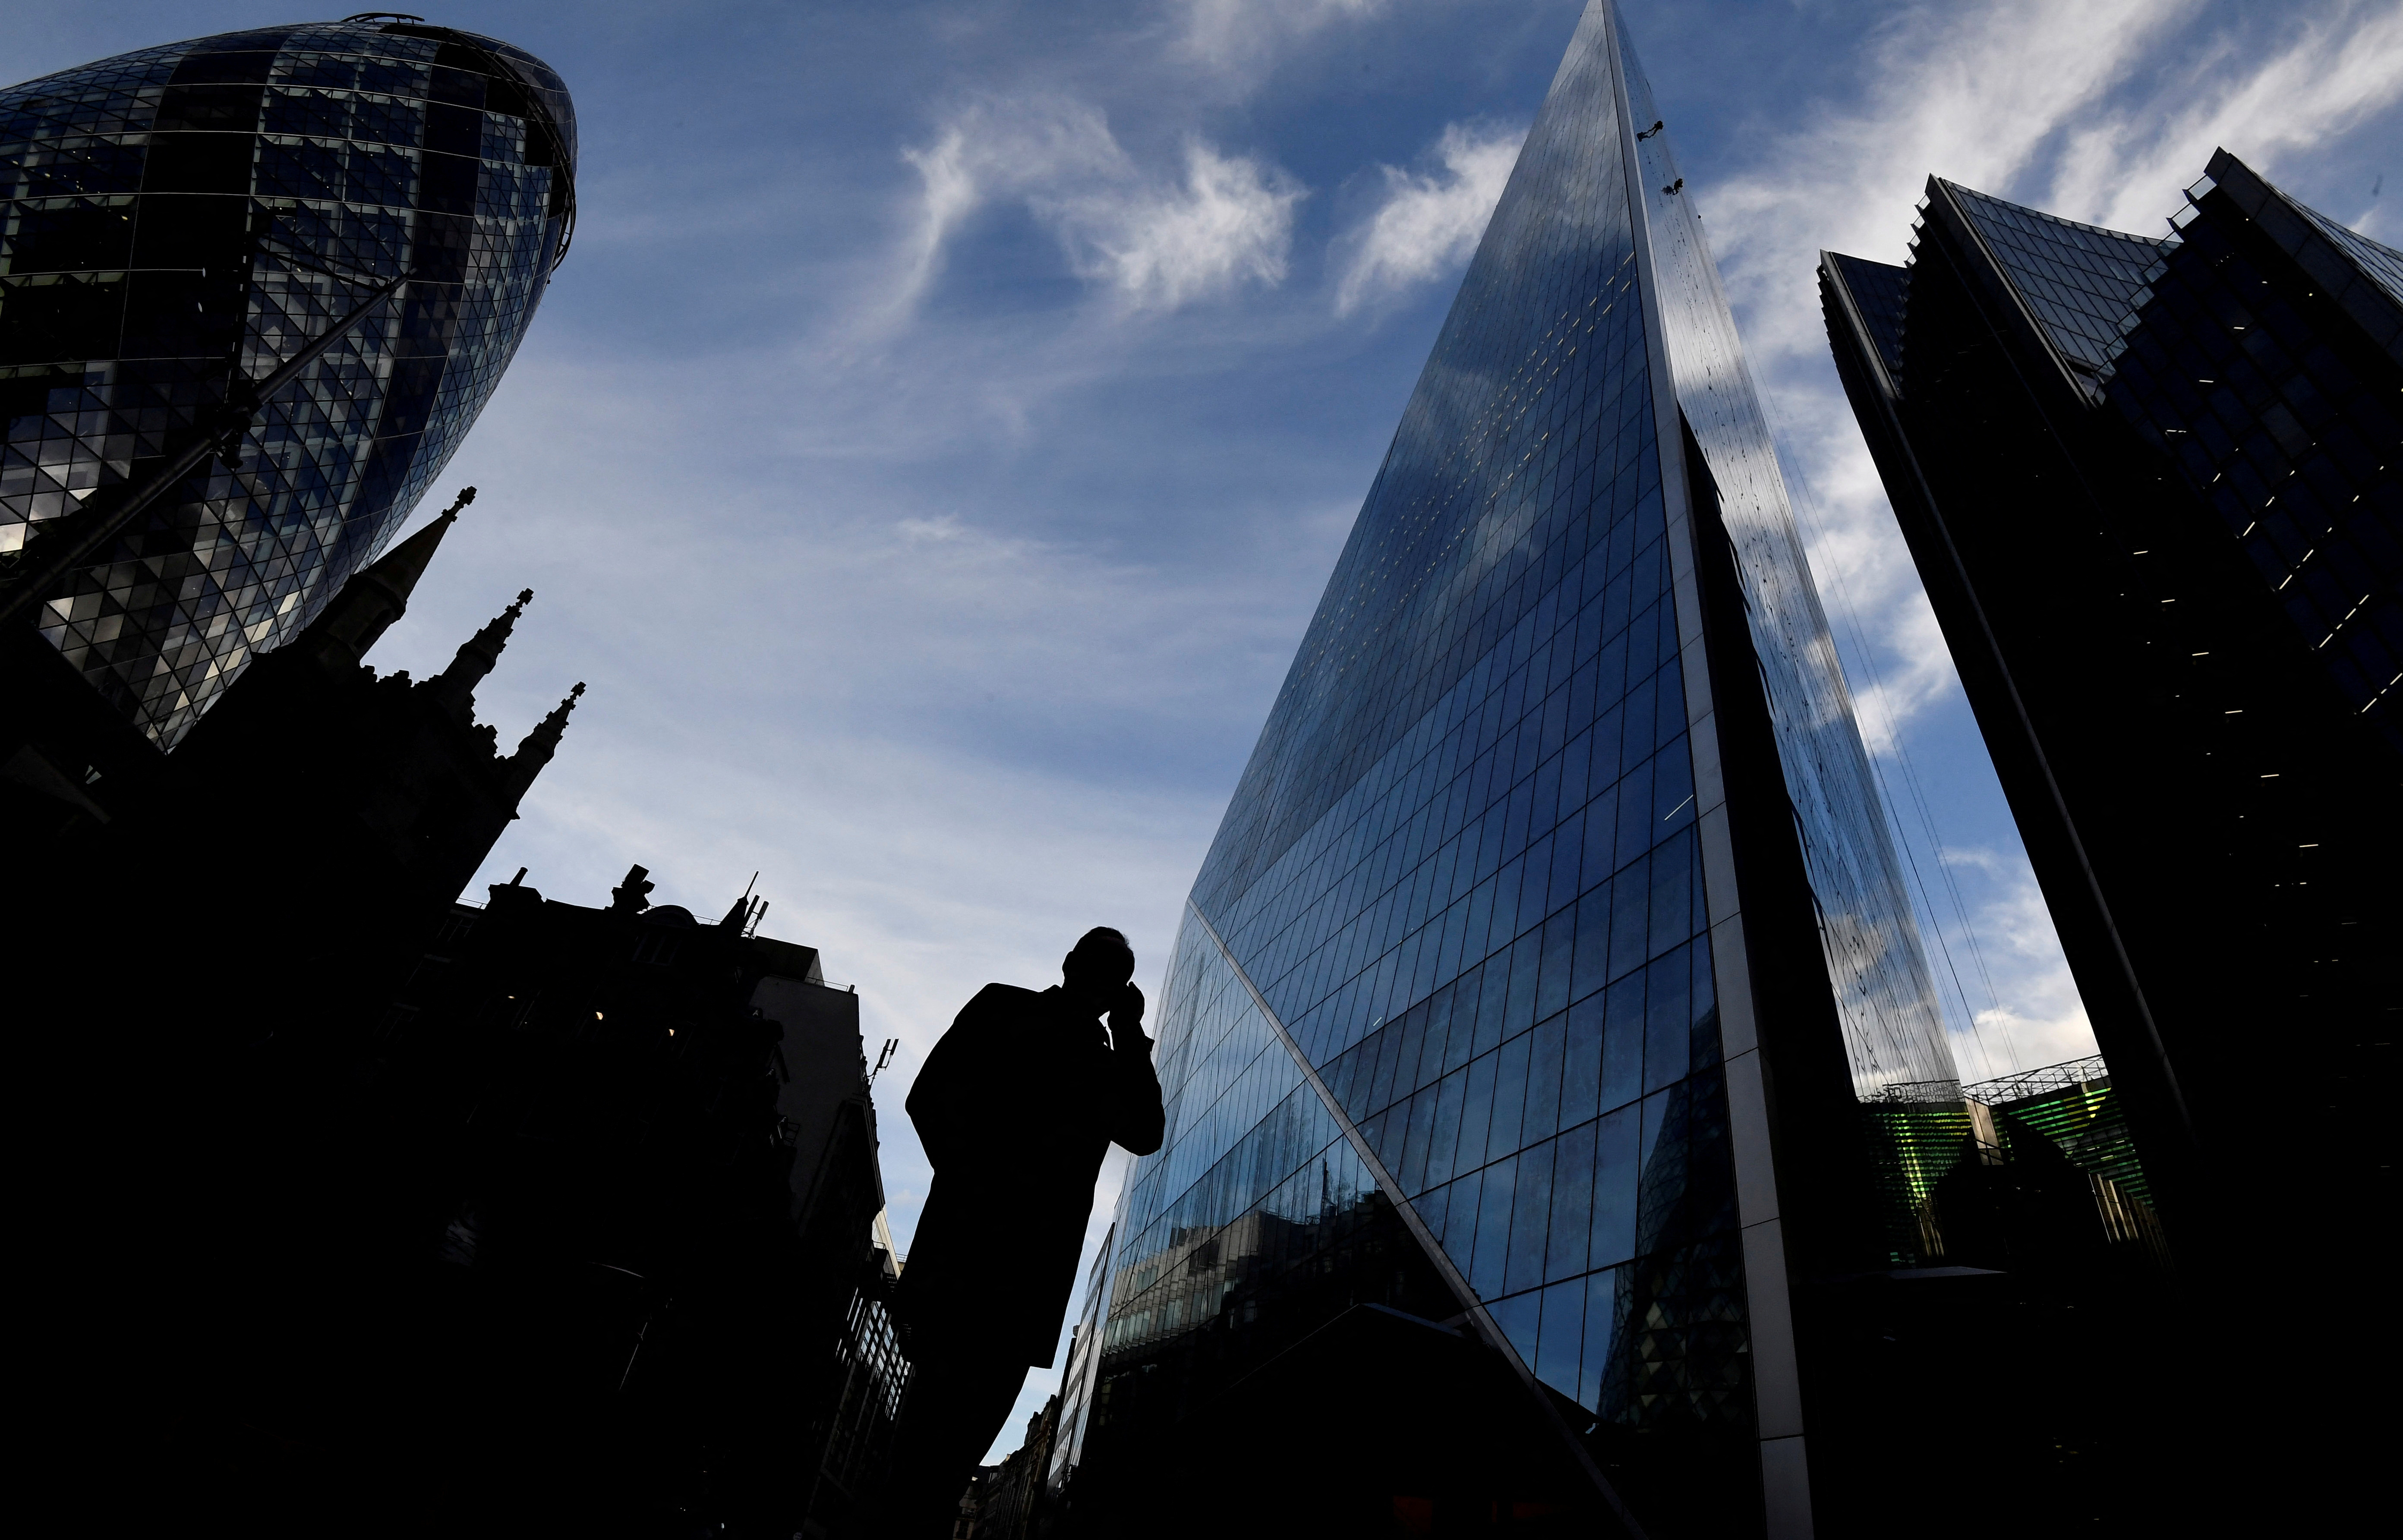 A man speaks on his phone as he walks past the Gherkin and other office buildings in the City of London